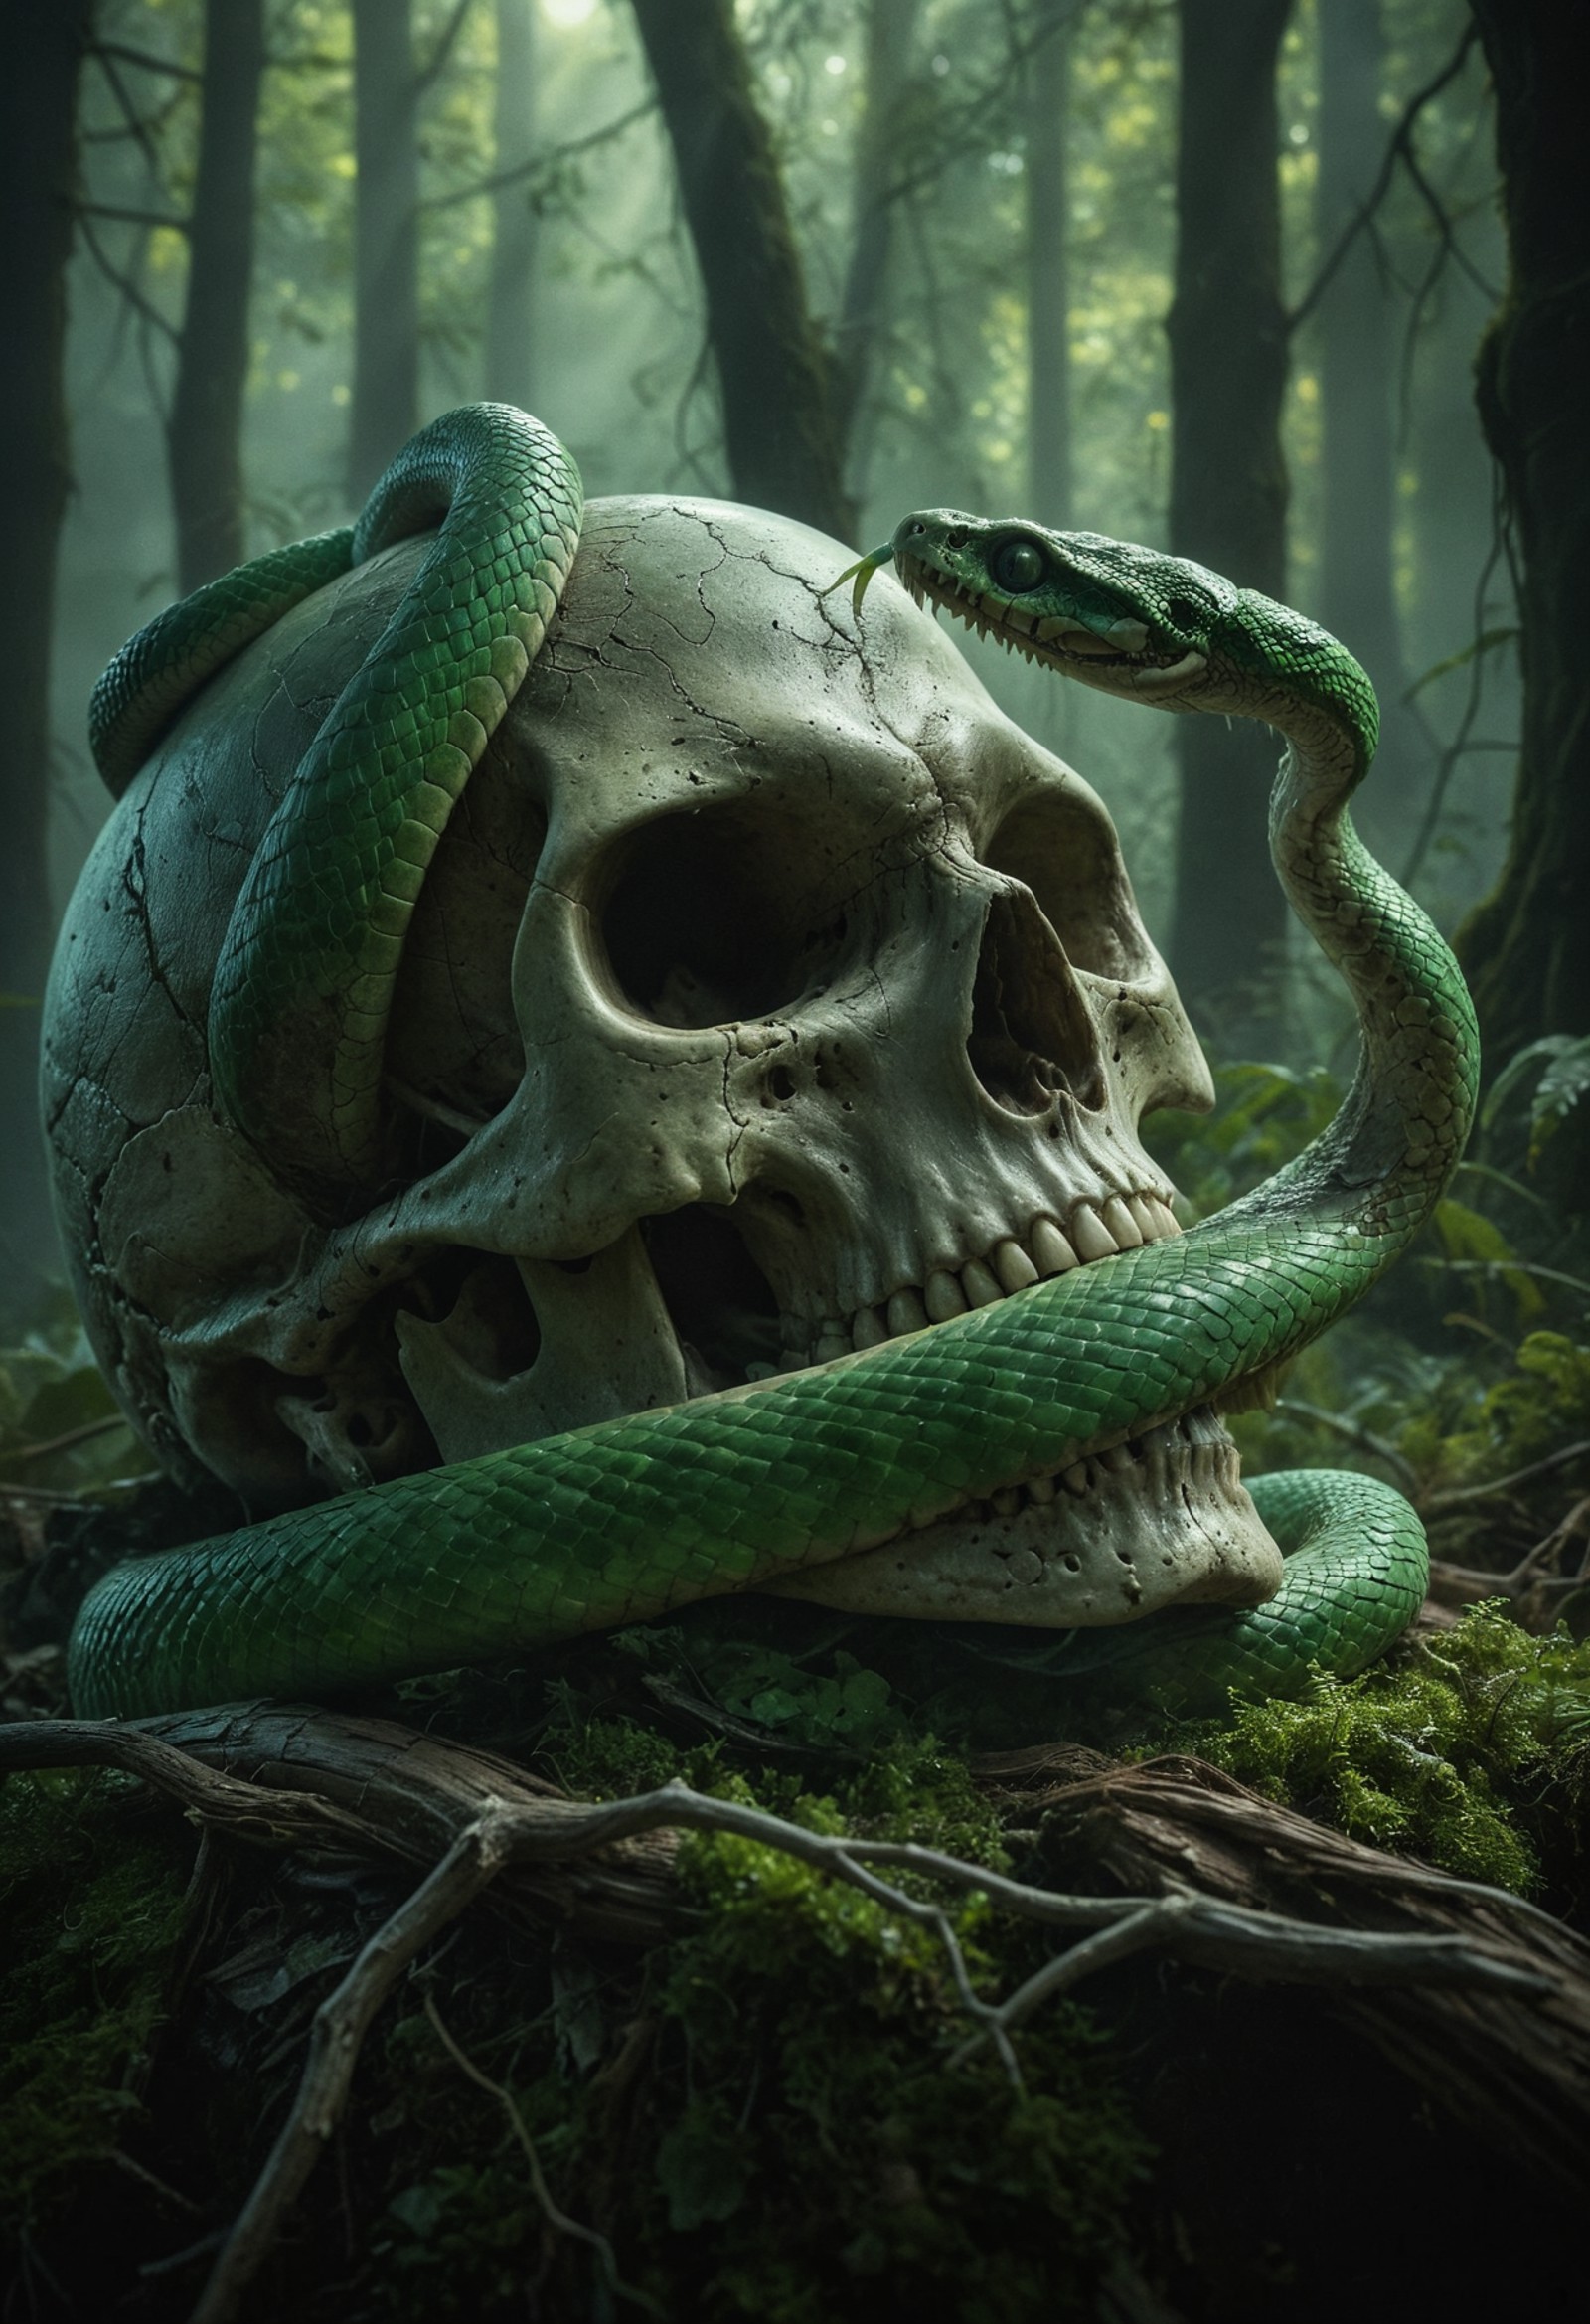 A human skull resting on a forest floor partially covered in moss. A green snake wraps around the mouth and head of the skull, flicking its tongue at the forehead. The background is a misty forest with diffused sunlight filtering through dense foliage, adding an eerie yet serene atmosphere to the setting. 